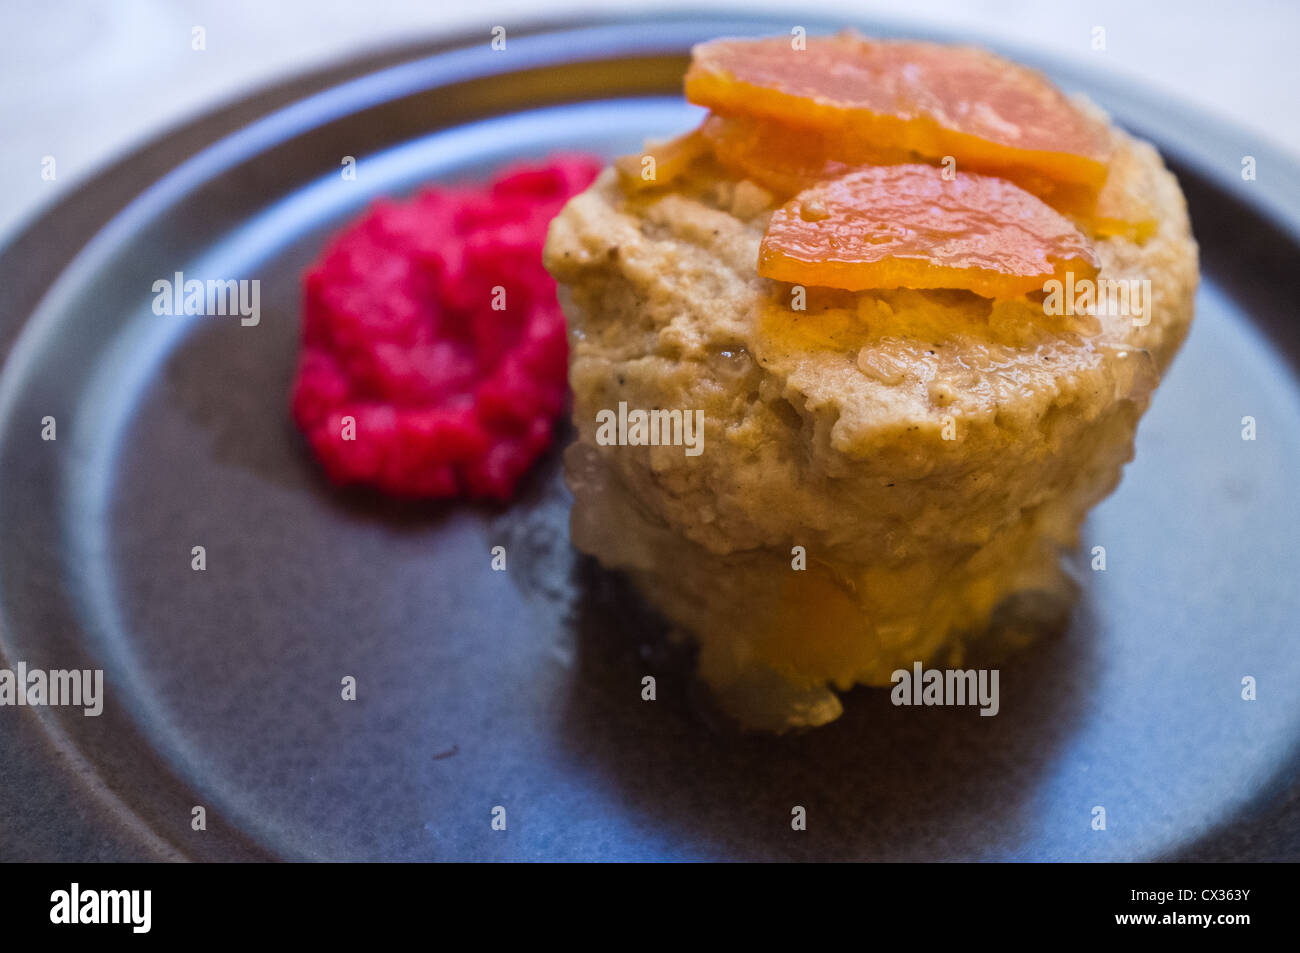 Gefilte Fish patties are traditional Jewish cuisine made of ground carp and served with carrots and horseradish. Stock Photo